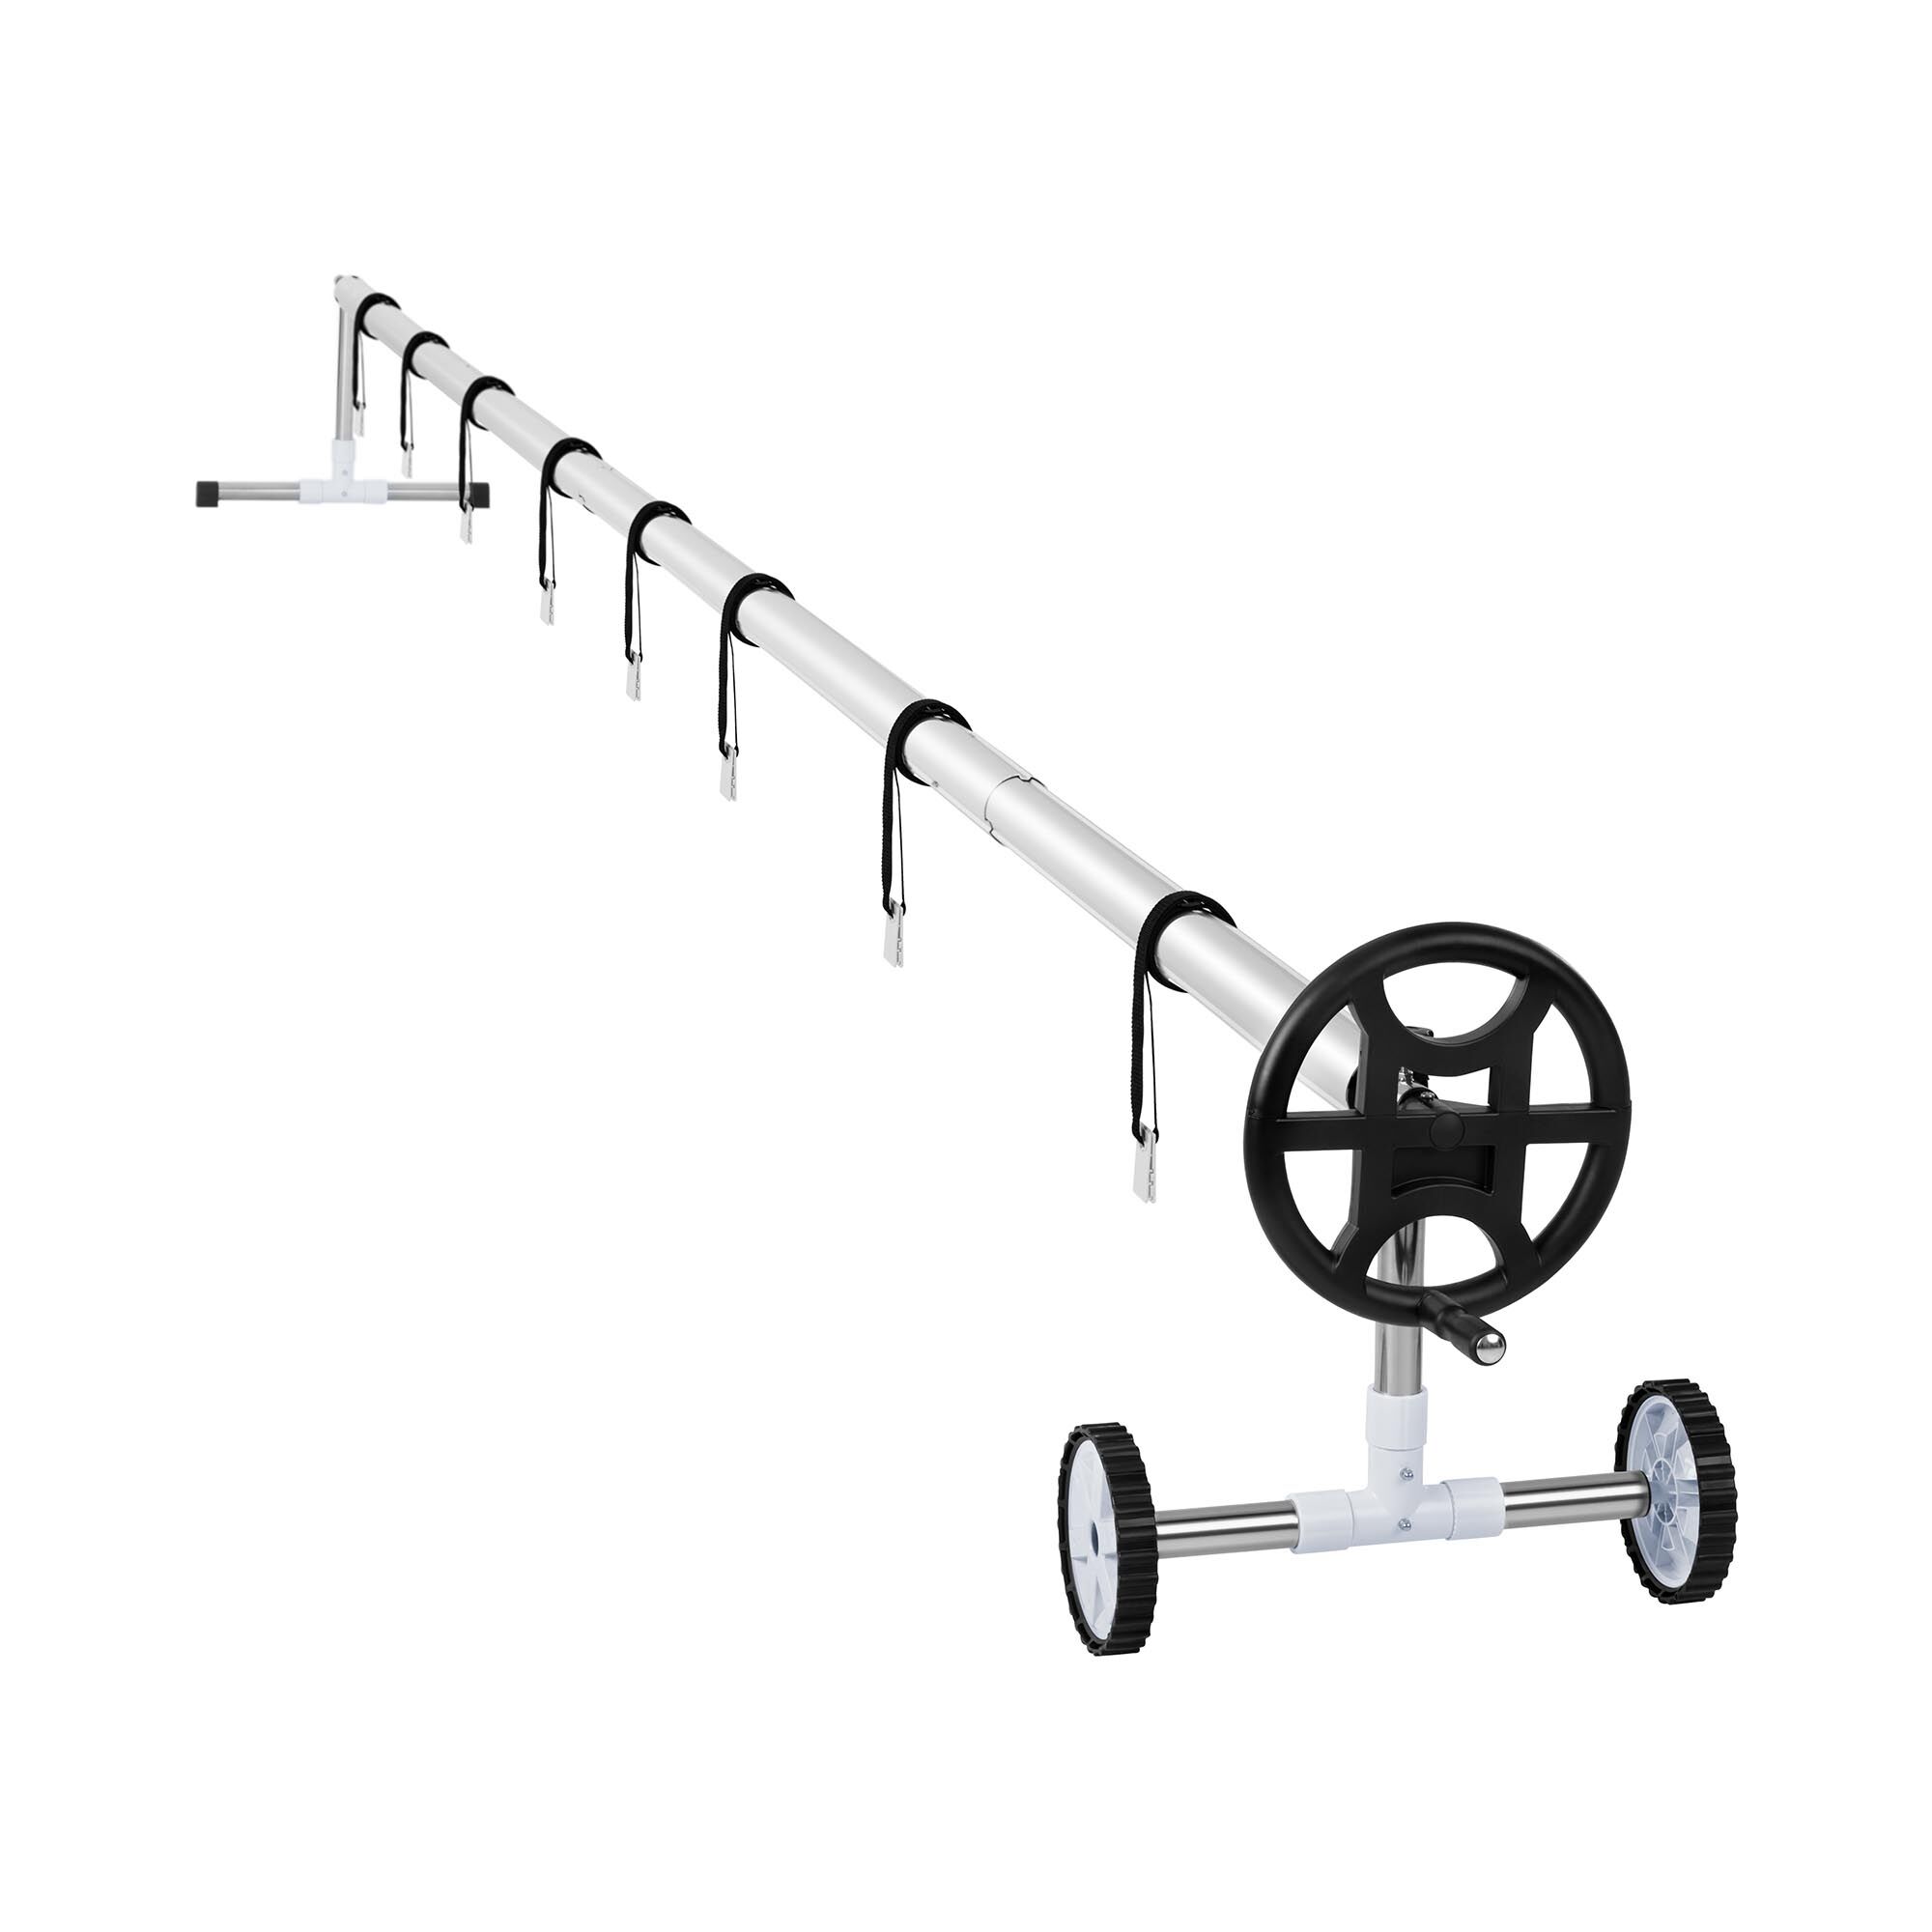 Uniprodo Pool retractor - 4.2 to 5.2 m - Mobile - Stainless steel - Incl. 8 straps UNI_POOL_REEL_520